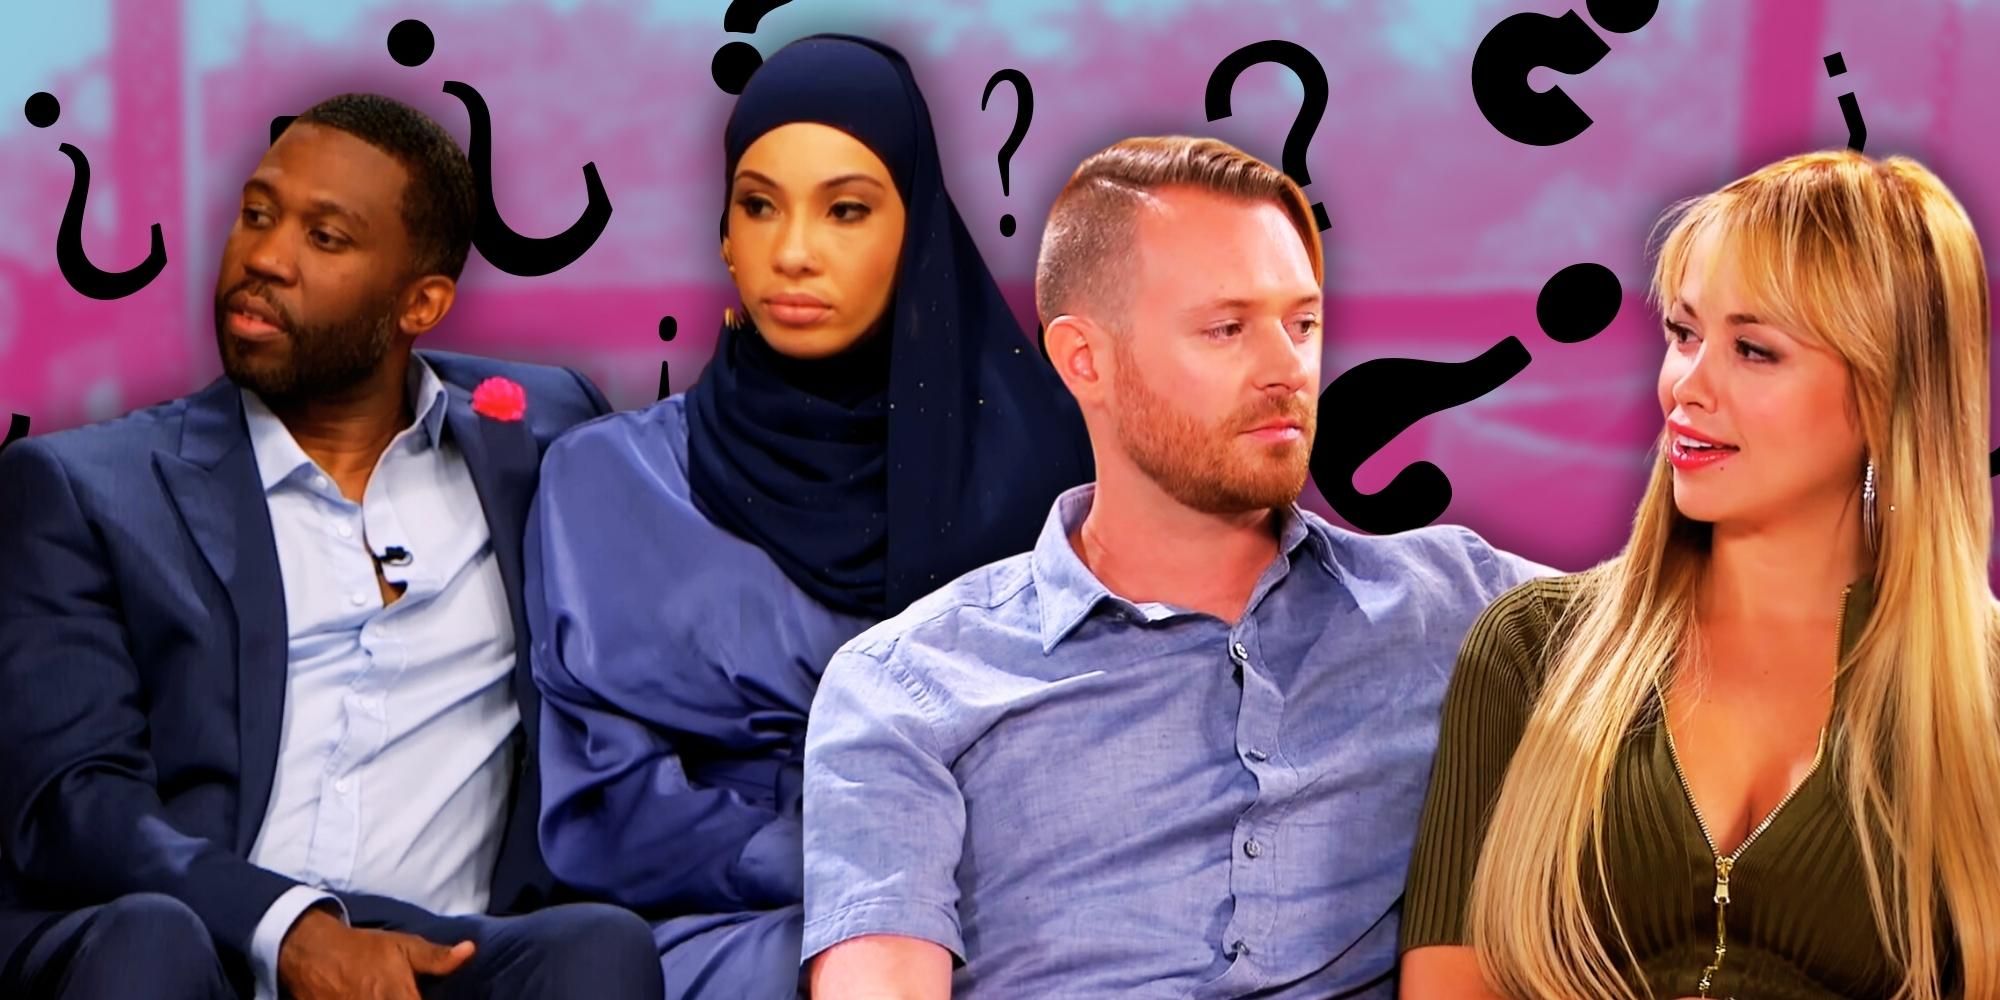 Paola and Russ Mayfield and Bilal and Shaeeda from their Tell All appearances on 90 day fiance